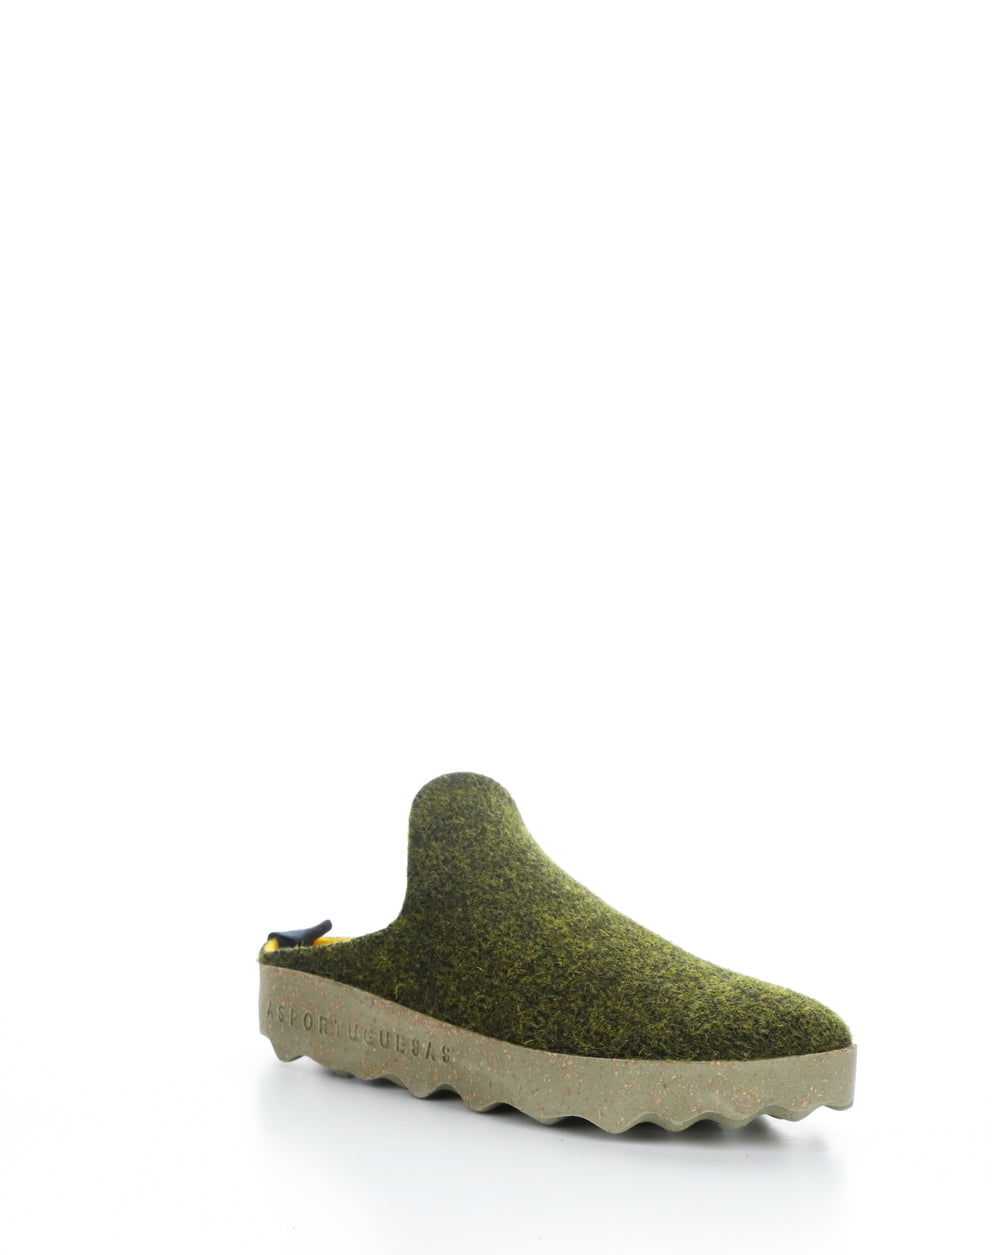 COME023ASP 075 FOREST Slip-on Mules